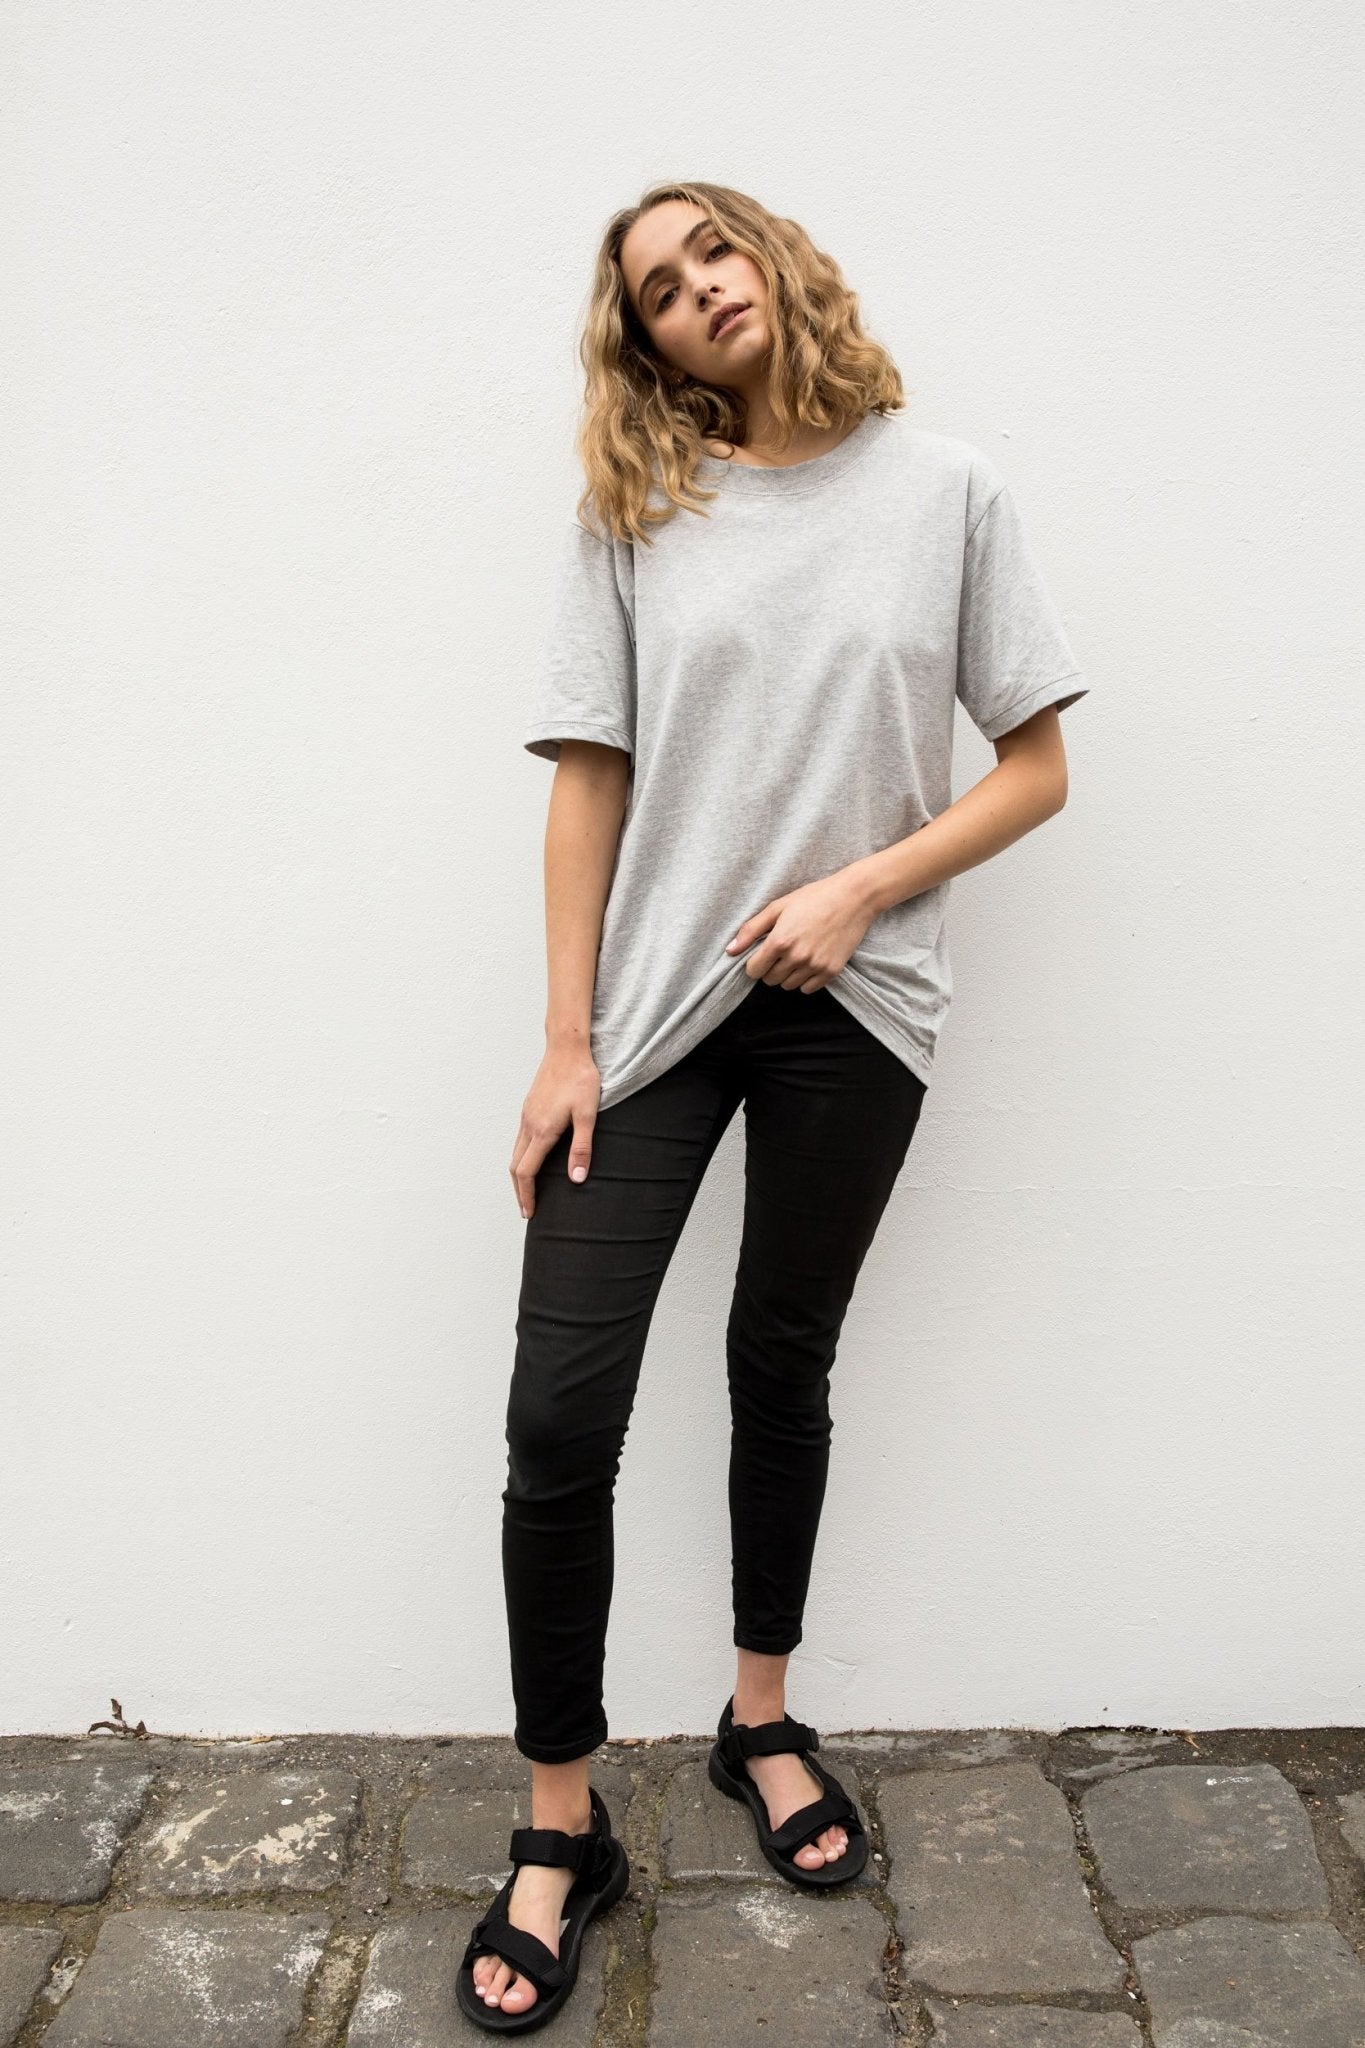 A.BCH A.15 Grey Marle Classic T-Shirt in Organic Cotton